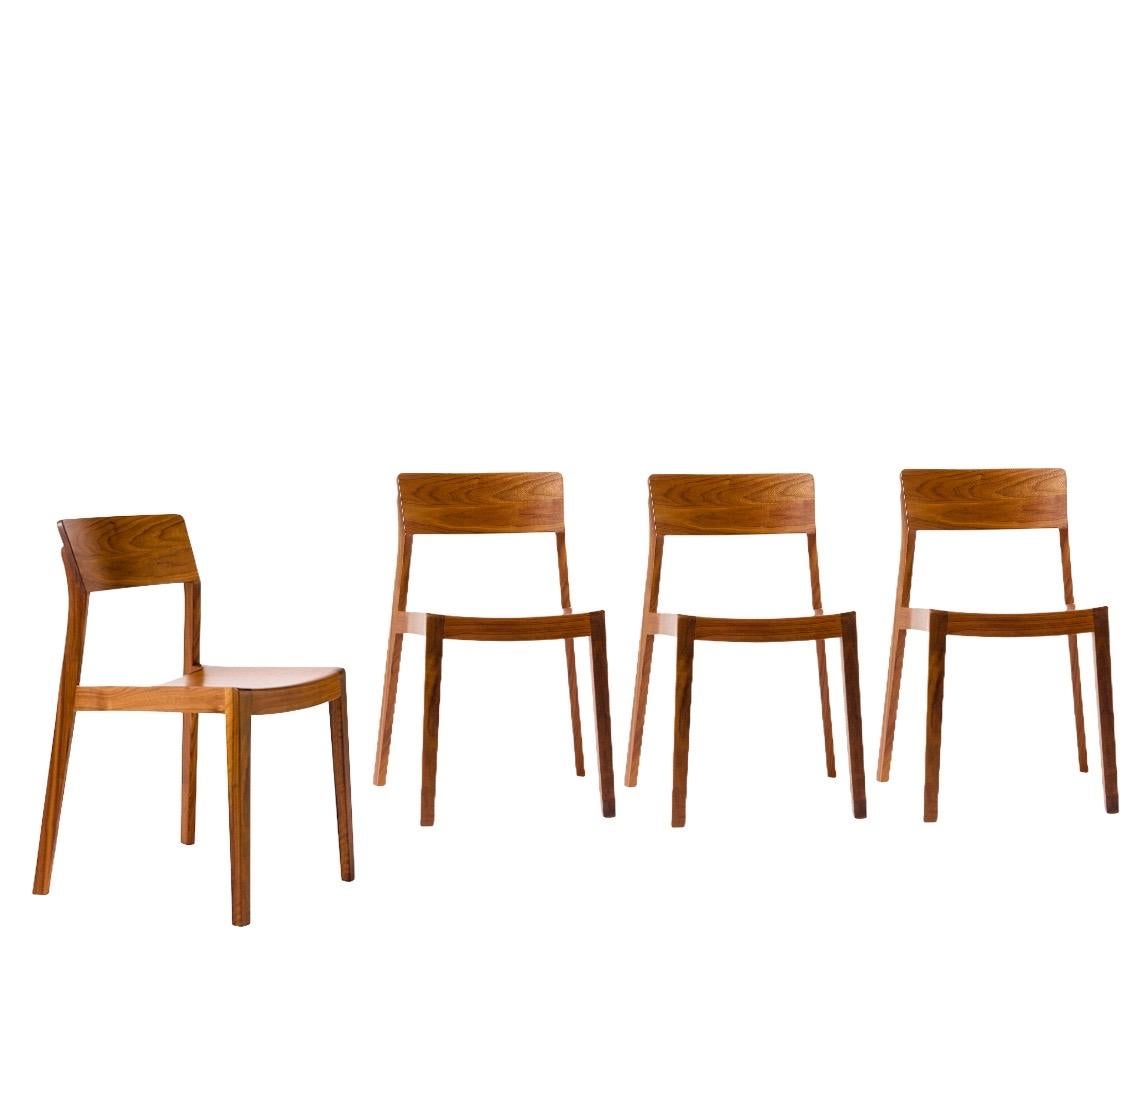 European Dietiker Ono Swiss Dining Chair, Design by This Weber, in Walnut, in Stock